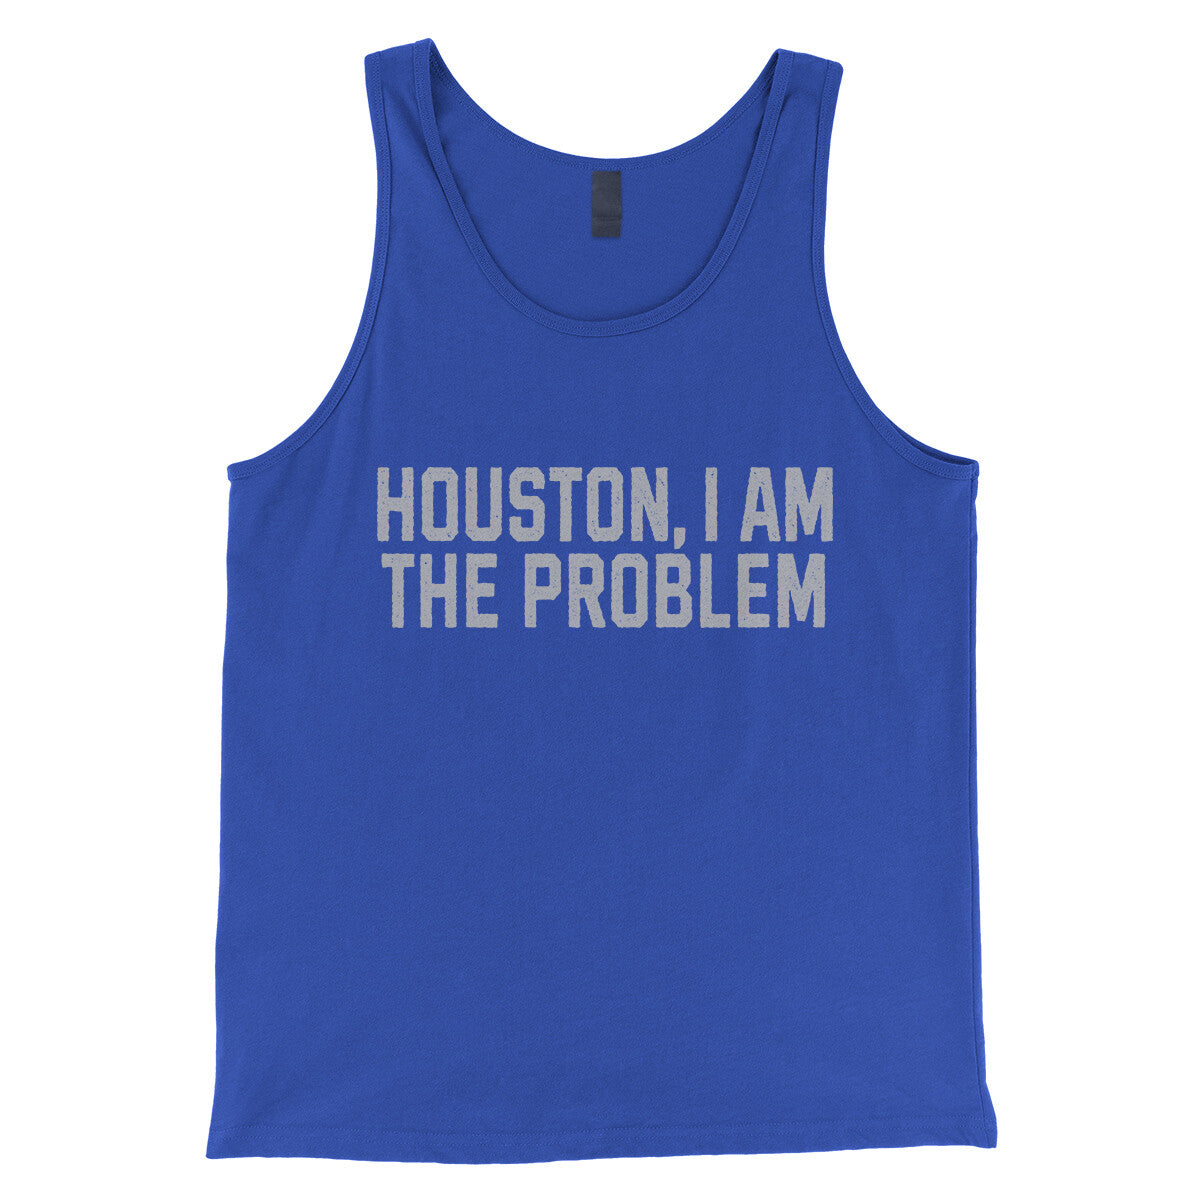 Houston I Am the Problem in True Royal Color